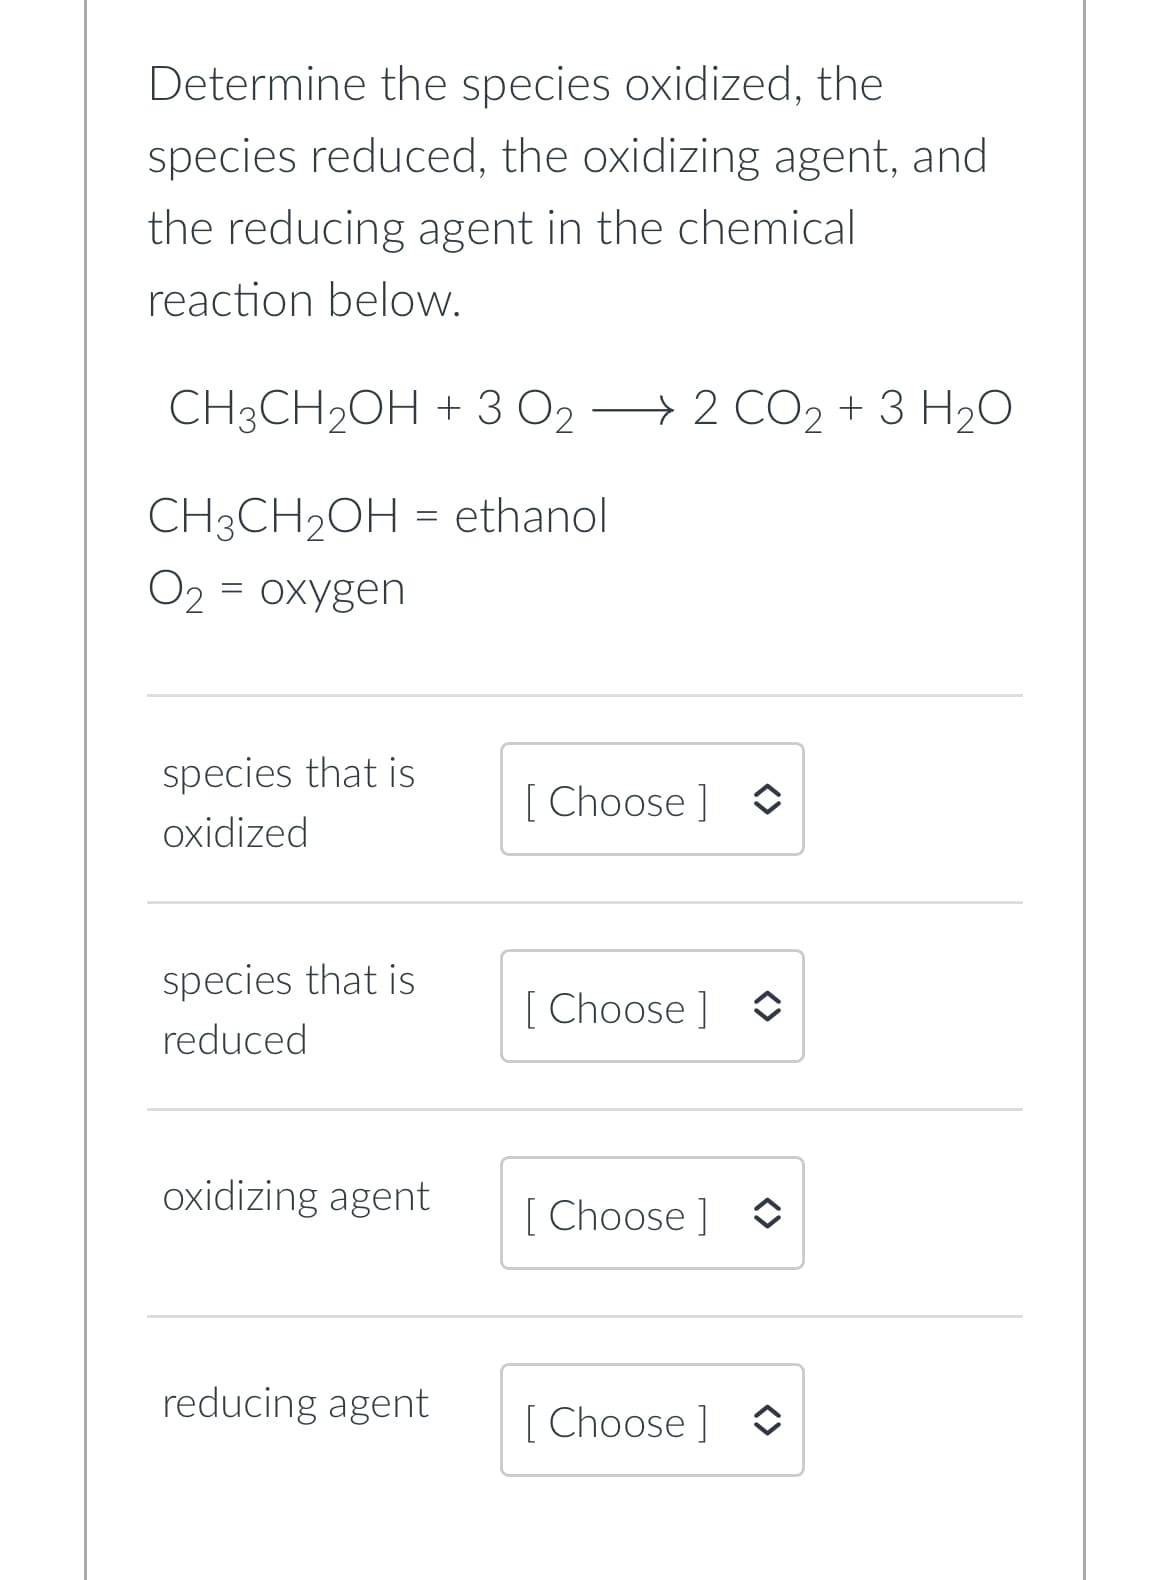 Determine the species oxidized, the
species reduced, the oxidizing agent, and
the reducing agent in the chemical
reaction below.
CH3CH₂OH + 3 O₂ → 2 CO₂ + 3 H₂O
CH3CH₂OH
= ethanol
O₂ = oxygen
species that is
oxidized
species that is
reduced
oxidizing agent
reducing agent
[Choose ]
[Choose] ↑
[Choose] ◊
[Choose ]